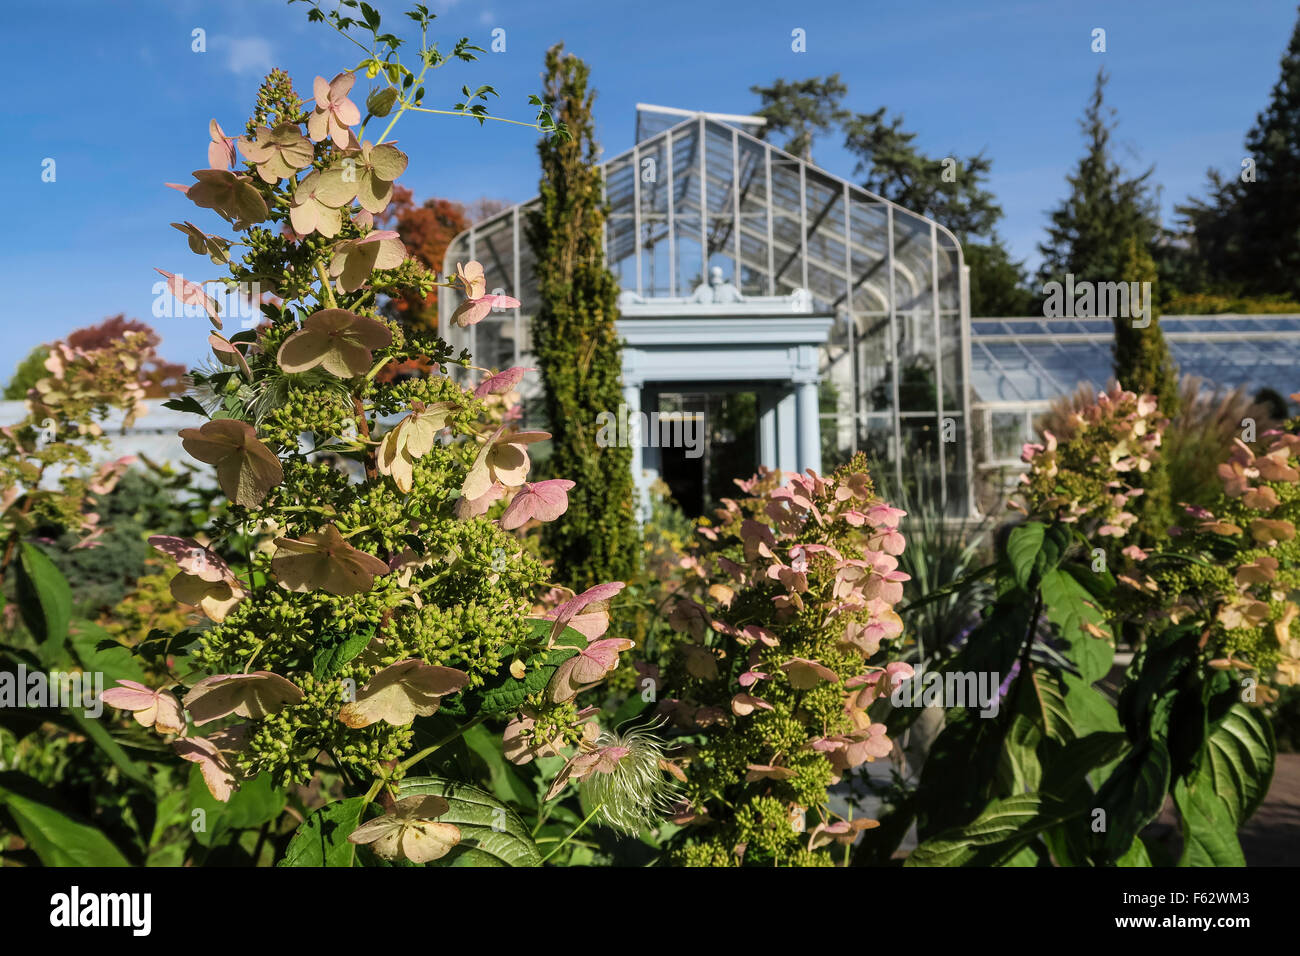 Marco Polo Stufano Conservatory At Wave Hill Public Garden In The